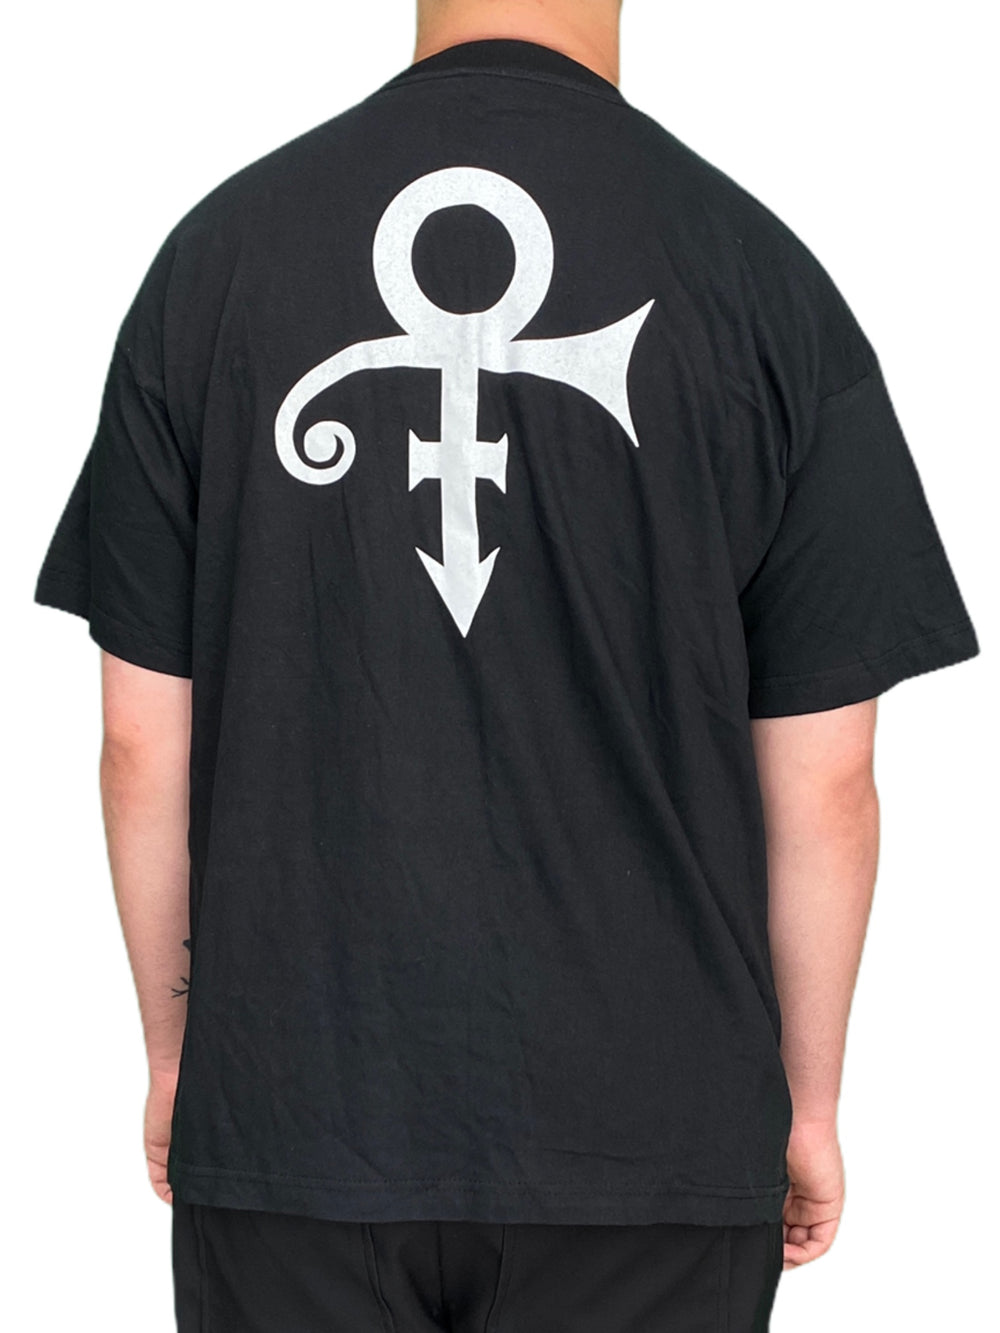 Prince – Official Local Crew Love Symbol Vintage Shirt Size XLARGE